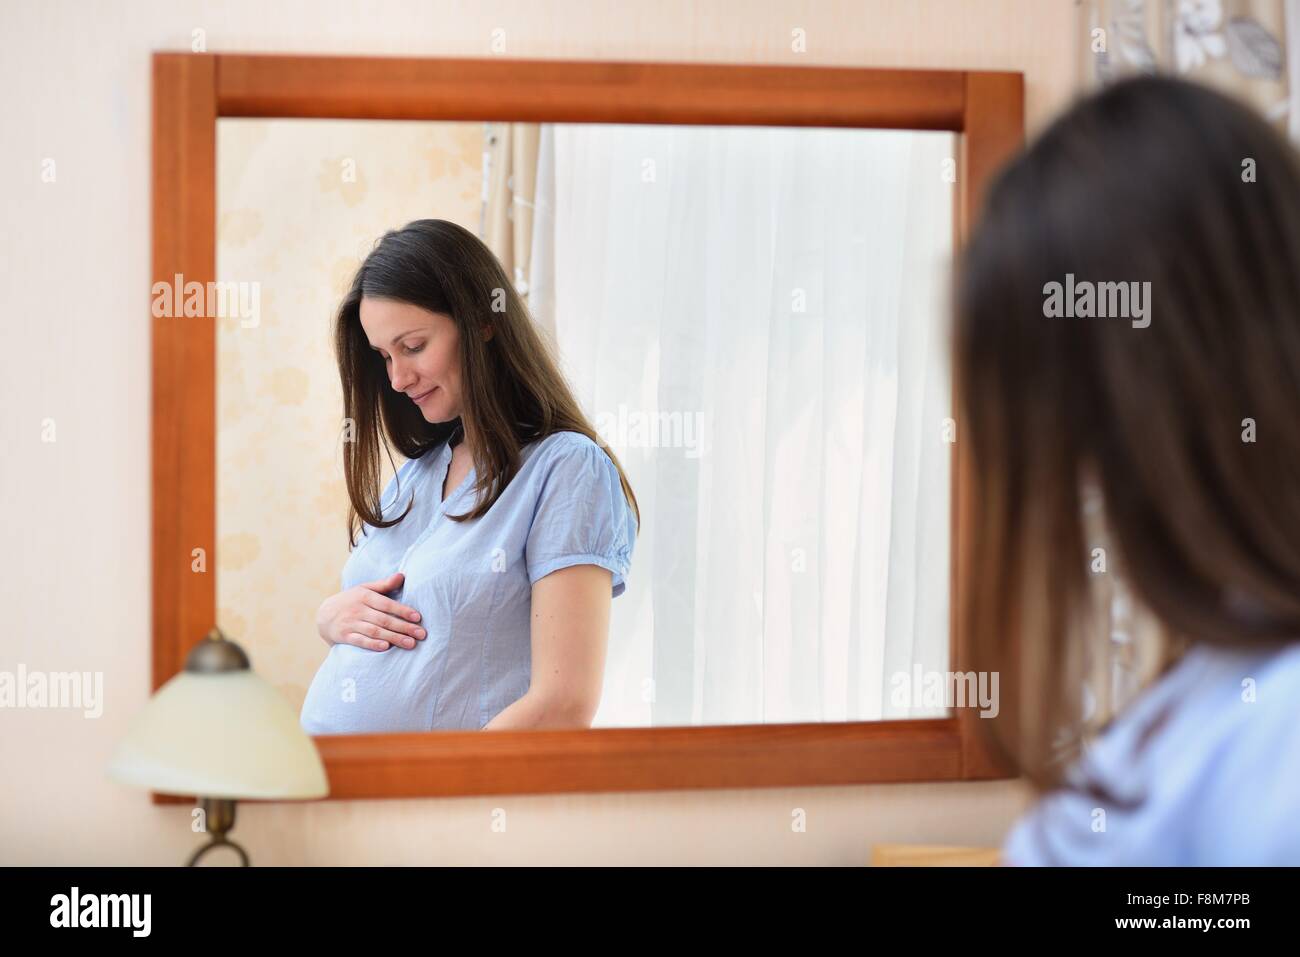 Pregnant woman holding stomach, standing in front of mirror Stock Photo